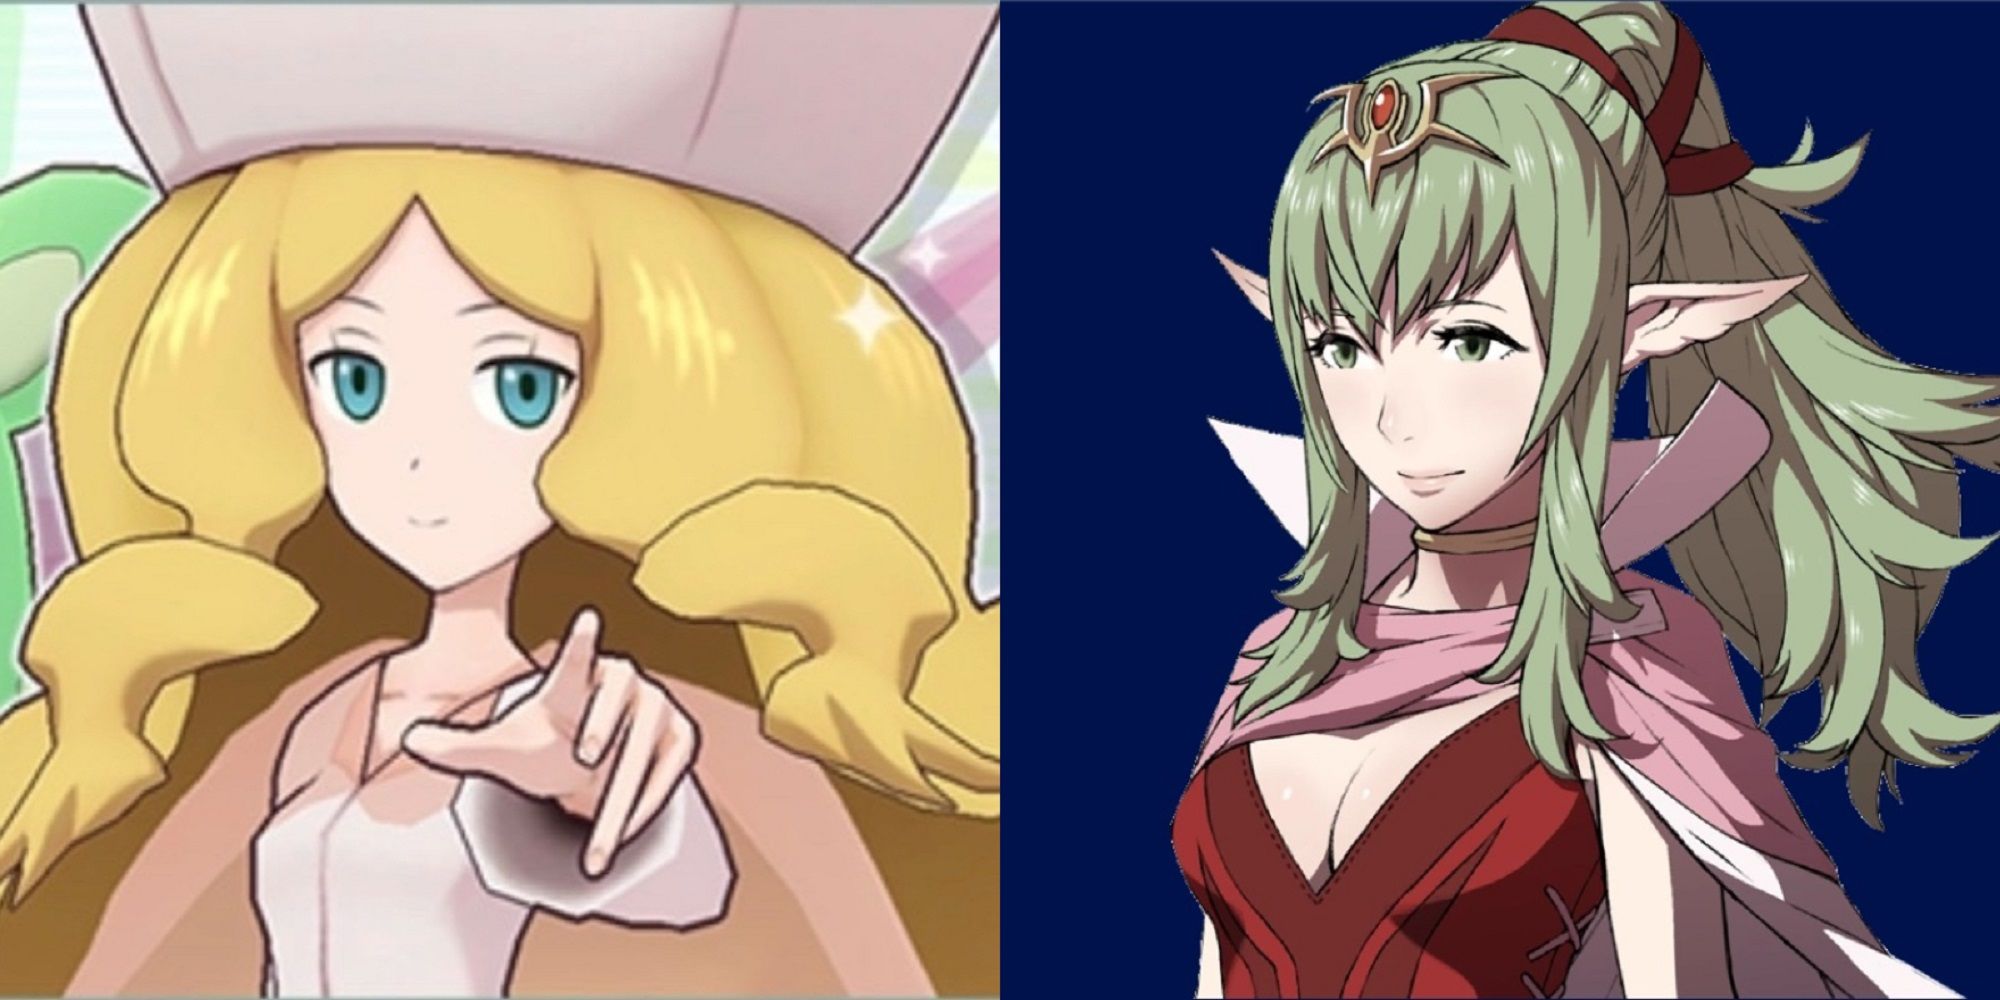 Split image of Caitlin's official artwork for Pokemon Masters and Tiki's portrait from Fire Emblem Awakening